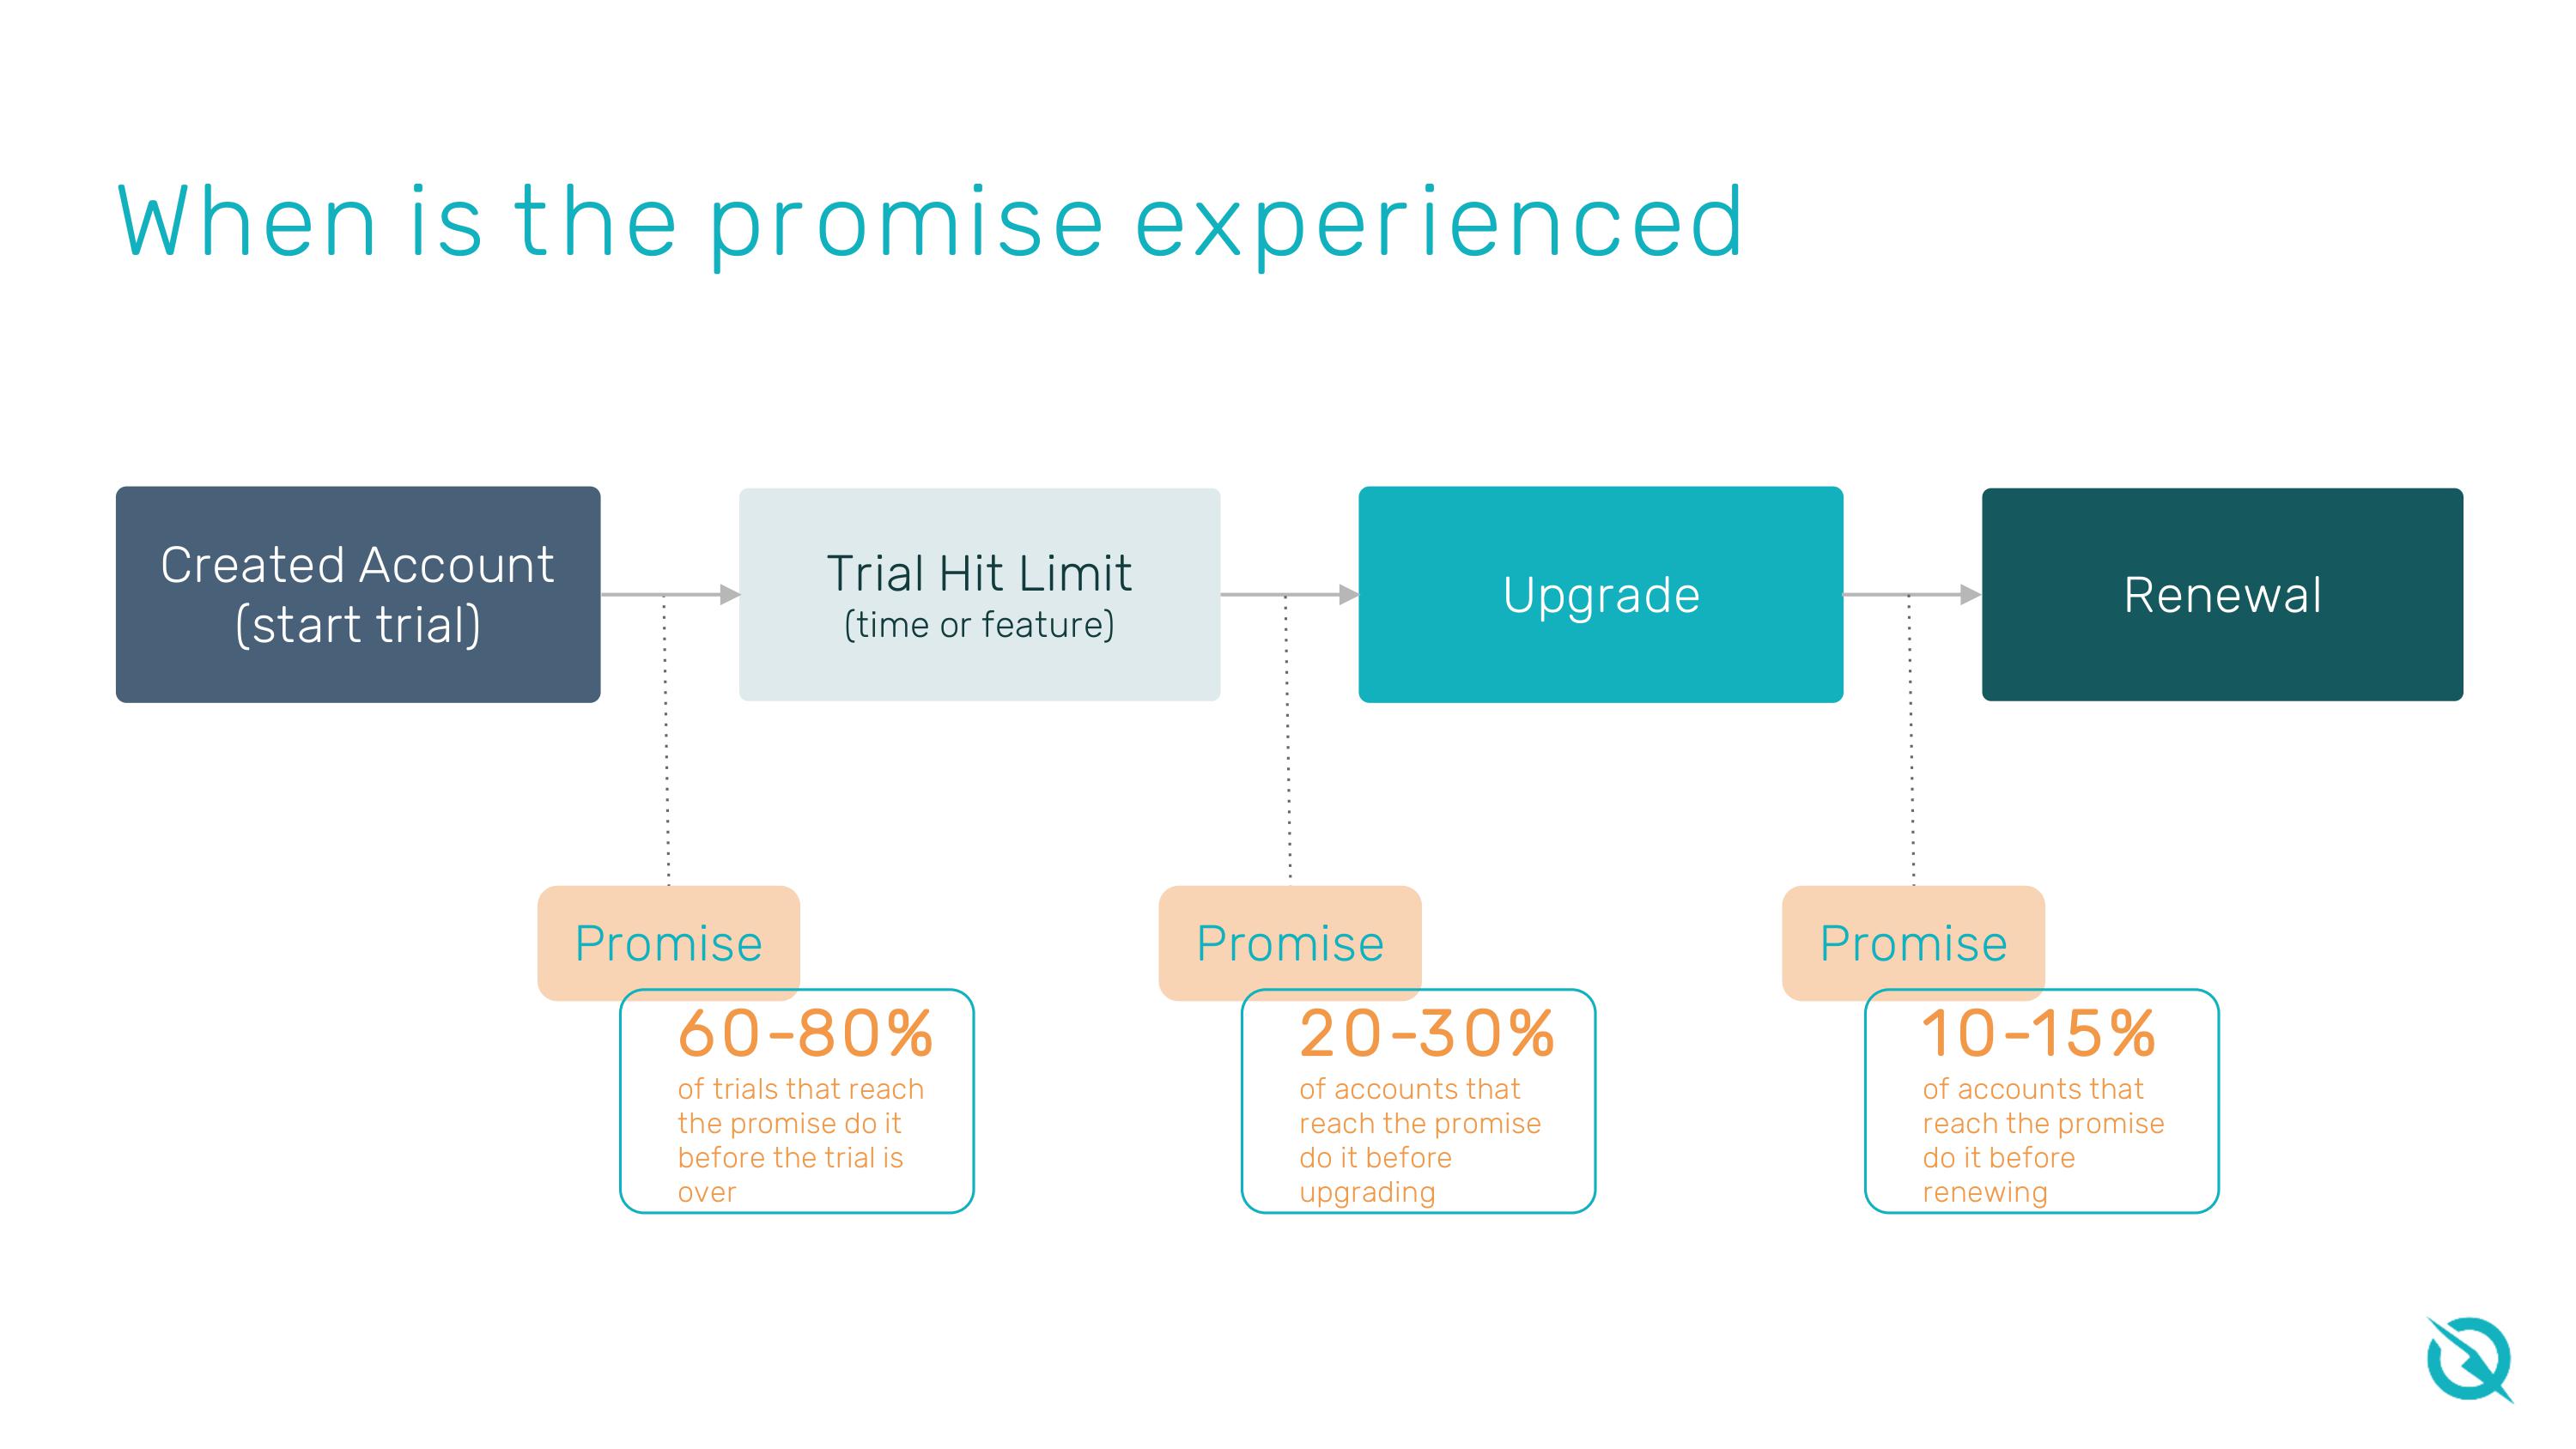 One Metric for User Onboarding: An image showing the percentage of users experiencing the sales promise at different stages of the lifecycle